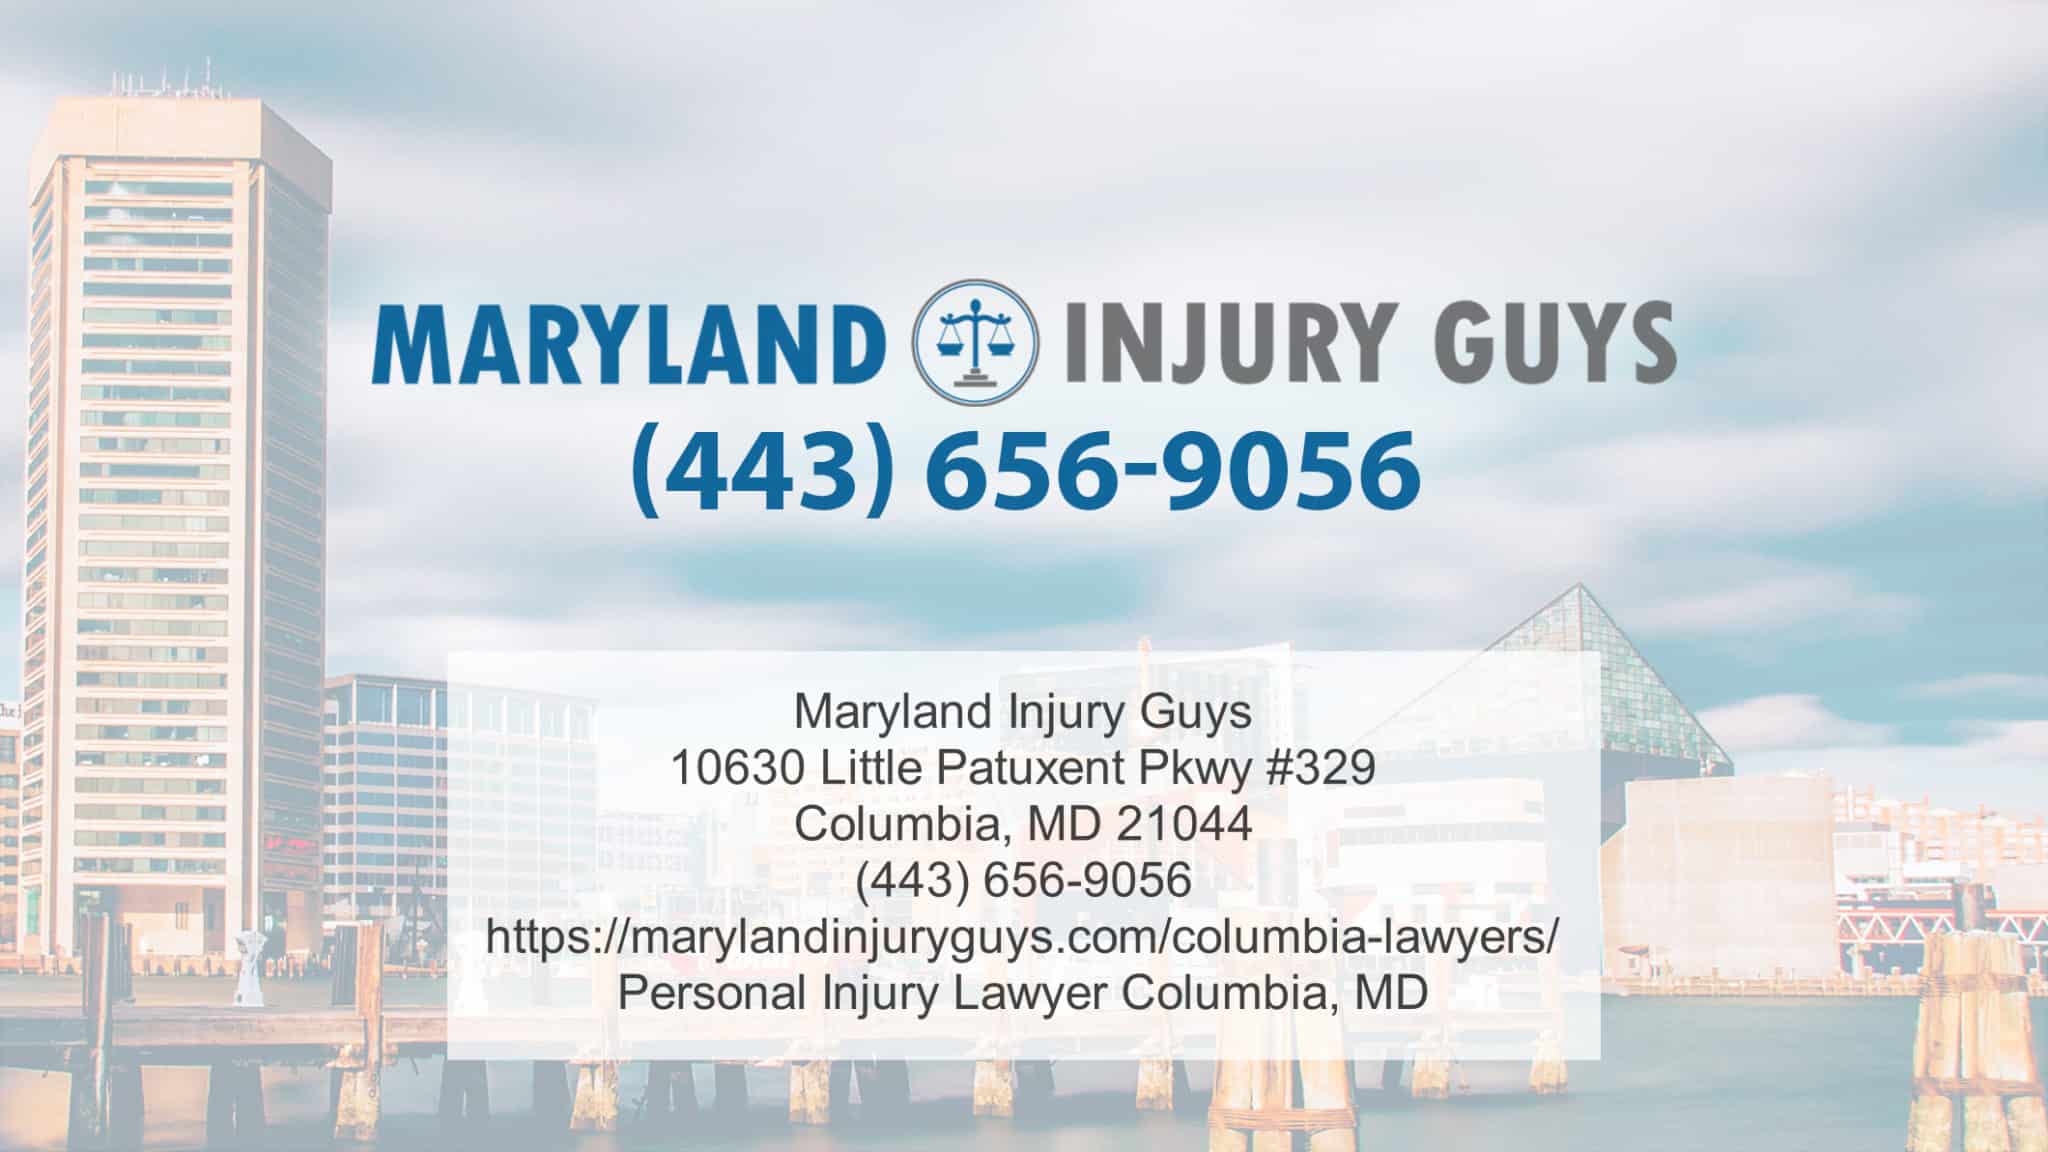 Get Compensation For Teens & Children With Columbia, MD Auto Accident Law Firm